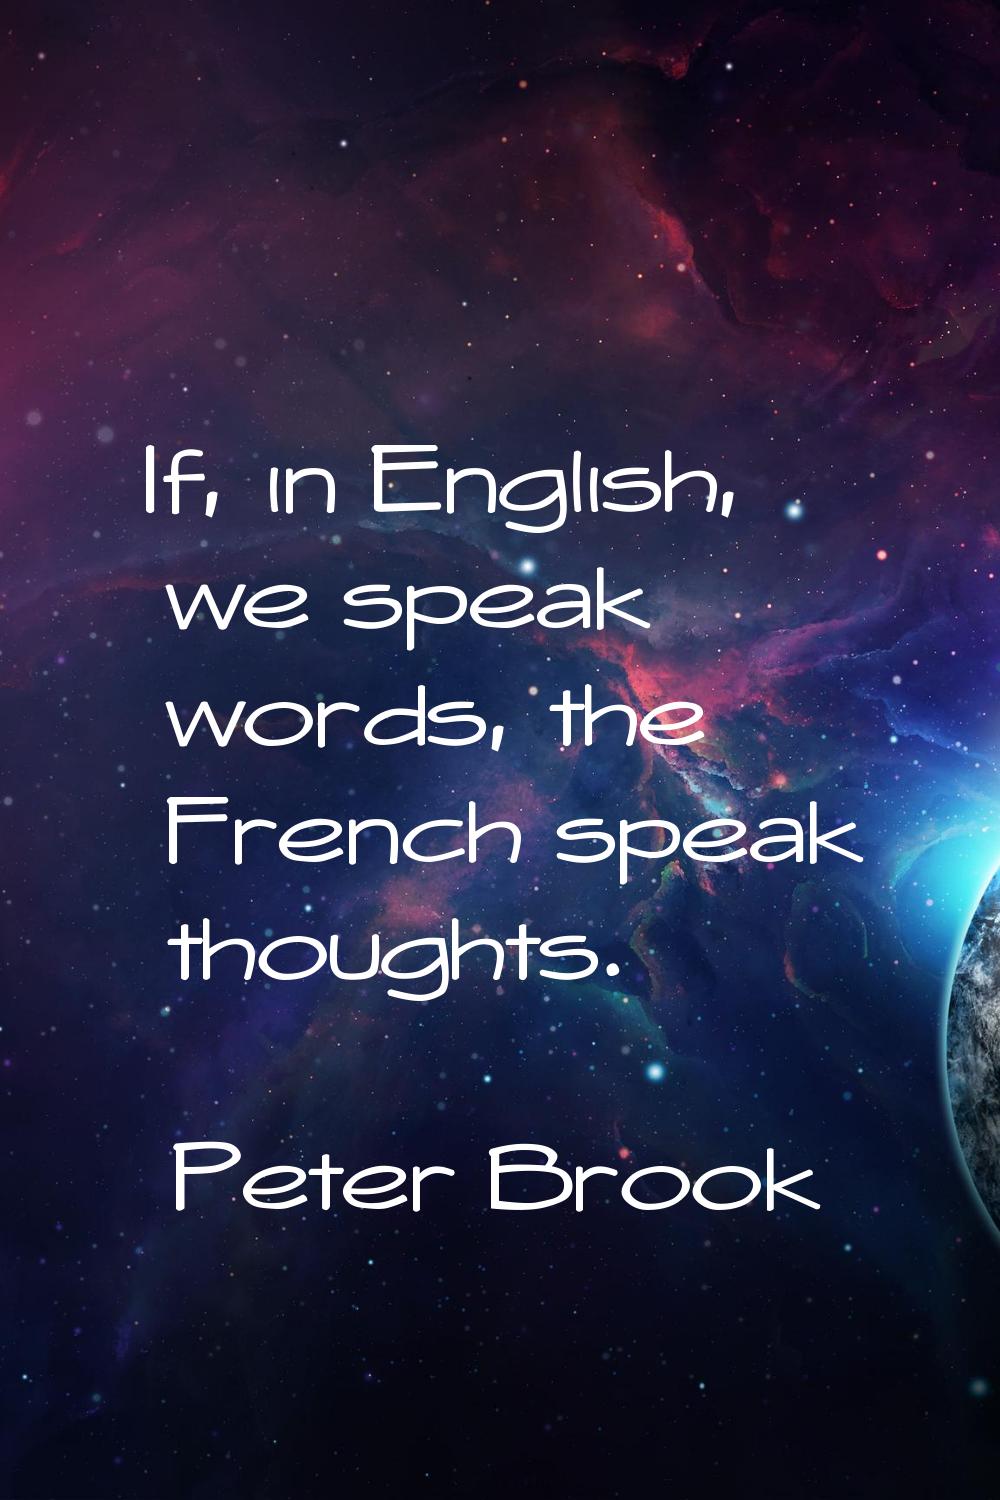 If, in English, we speak words, the French speak thoughts.